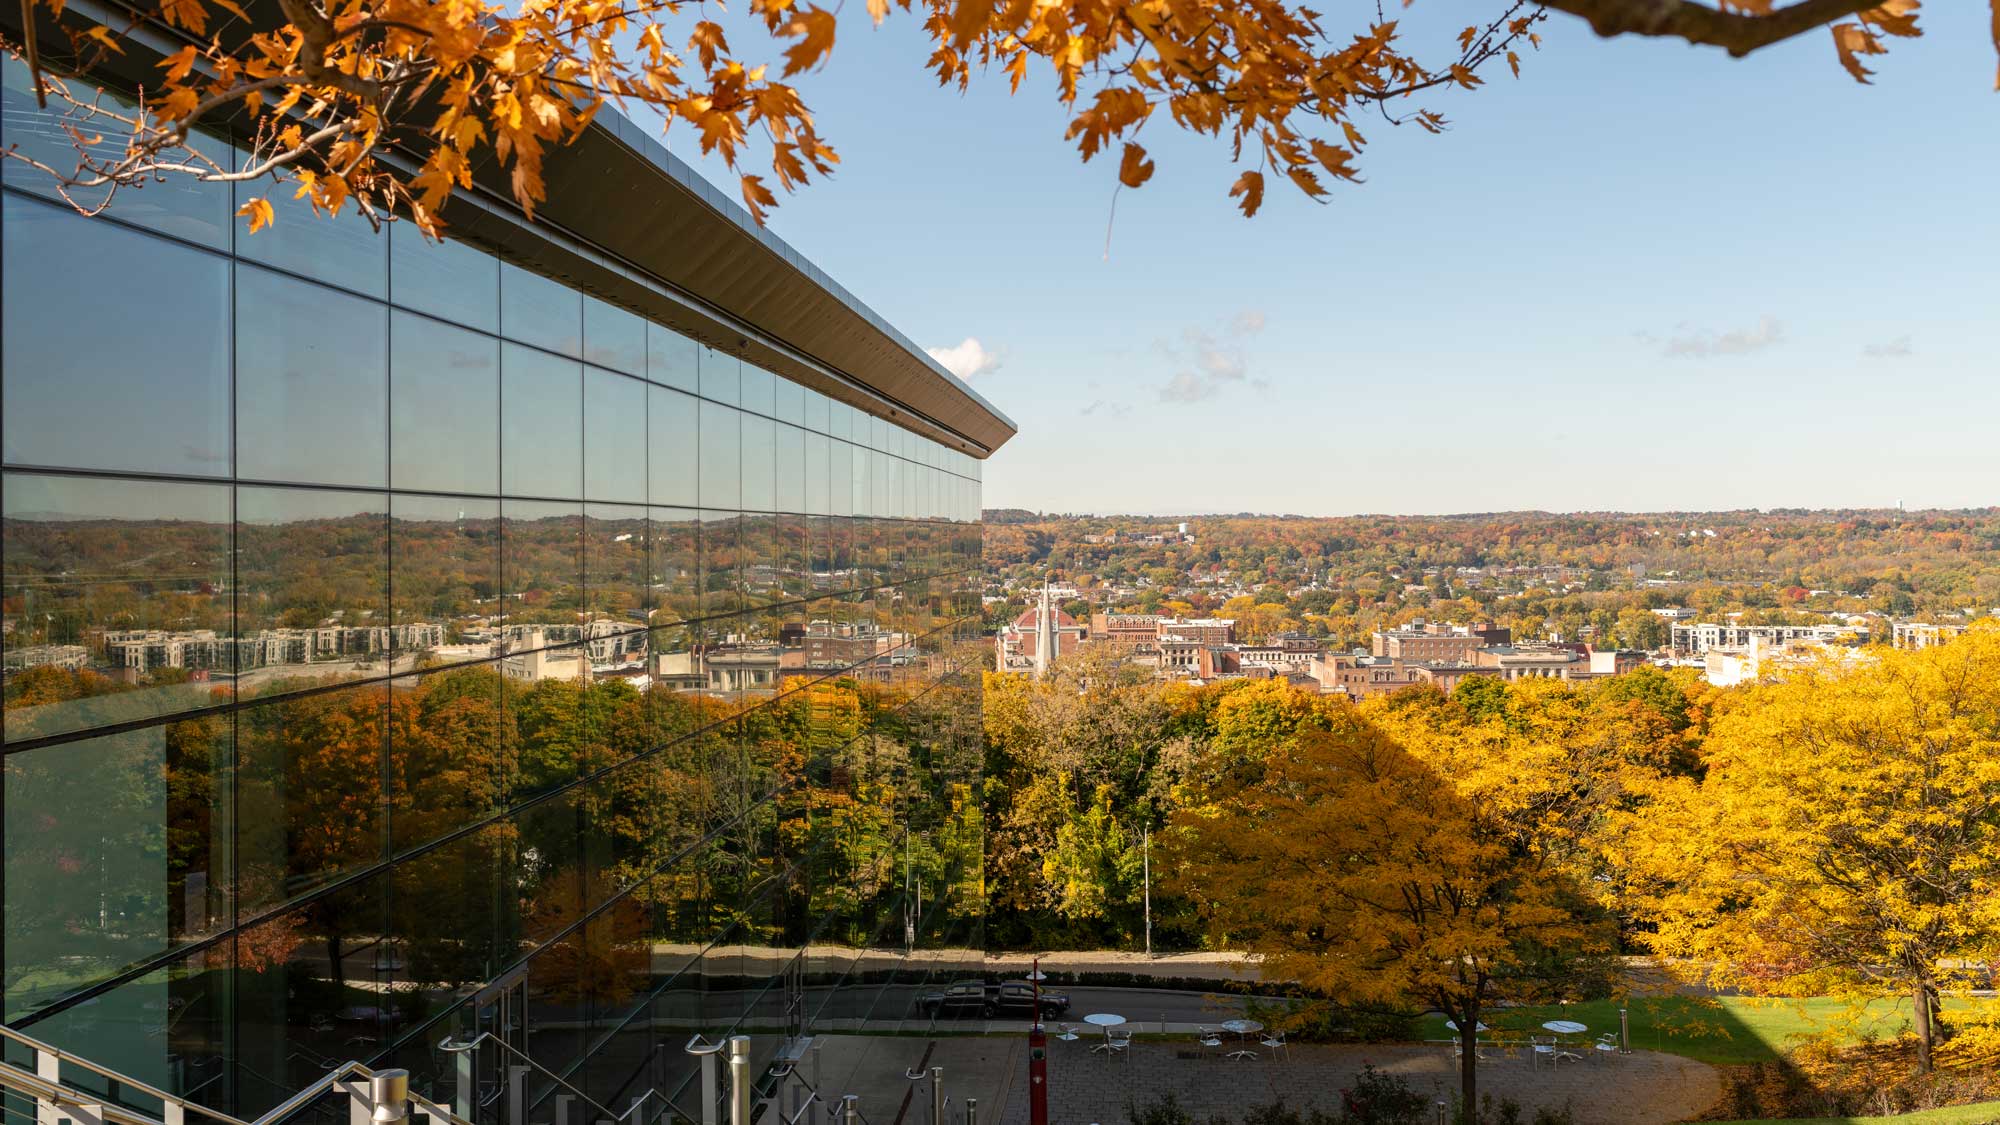 EMPAC's north façade reflects the city of troy looking west during fall.